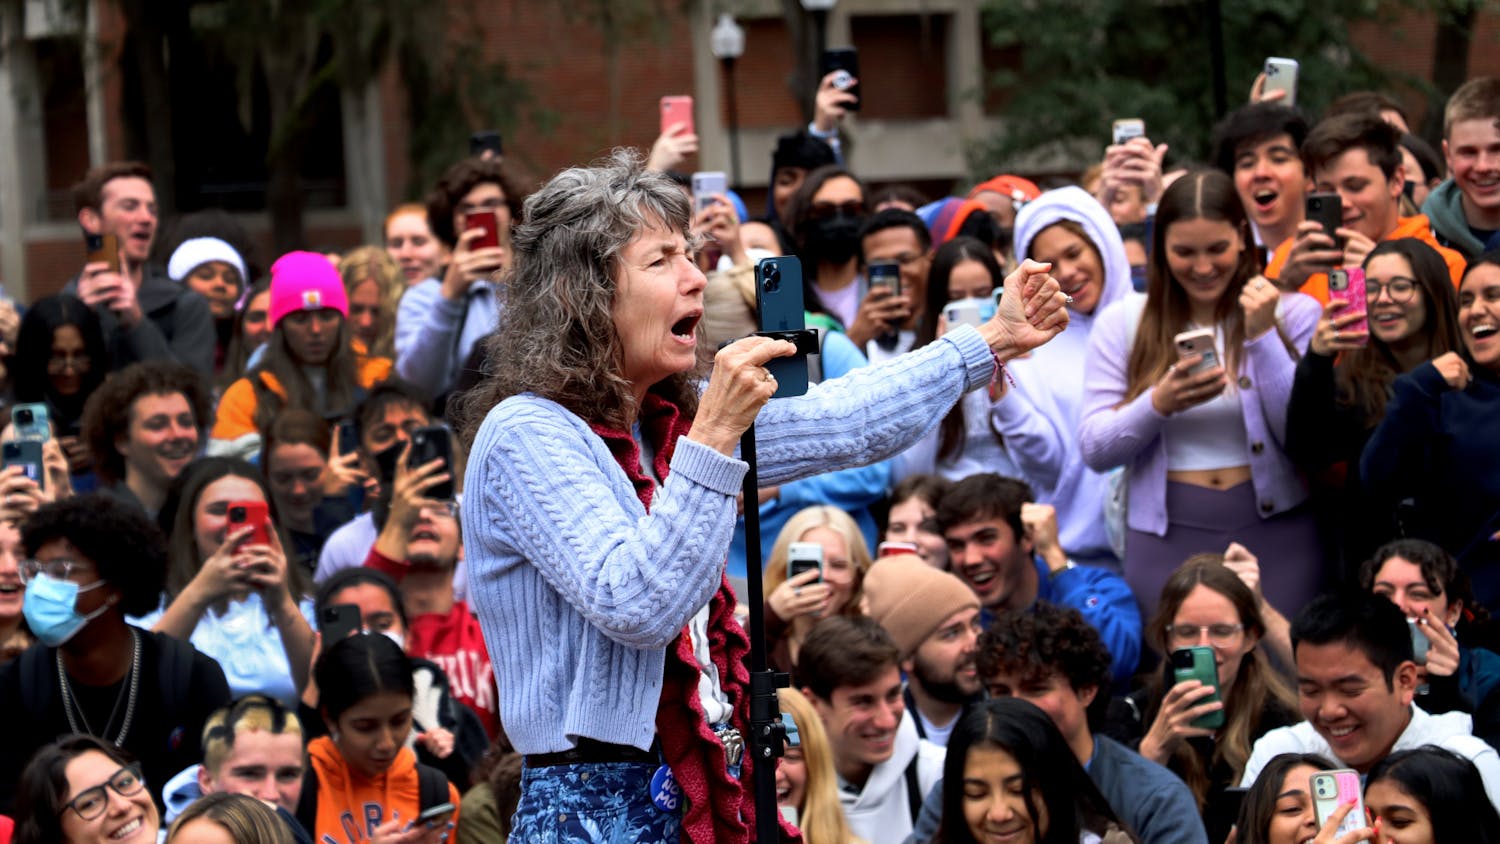 Cindy Lasseter Smock, also known as Sister Cindy, rallies up a crowd of over 500 at Plaza of the Americas on Monday, Feb. 7. Smock, who has amassed over 360 thousand TikTok followers, is famous for traveling across the U.S. and proselytizing. 